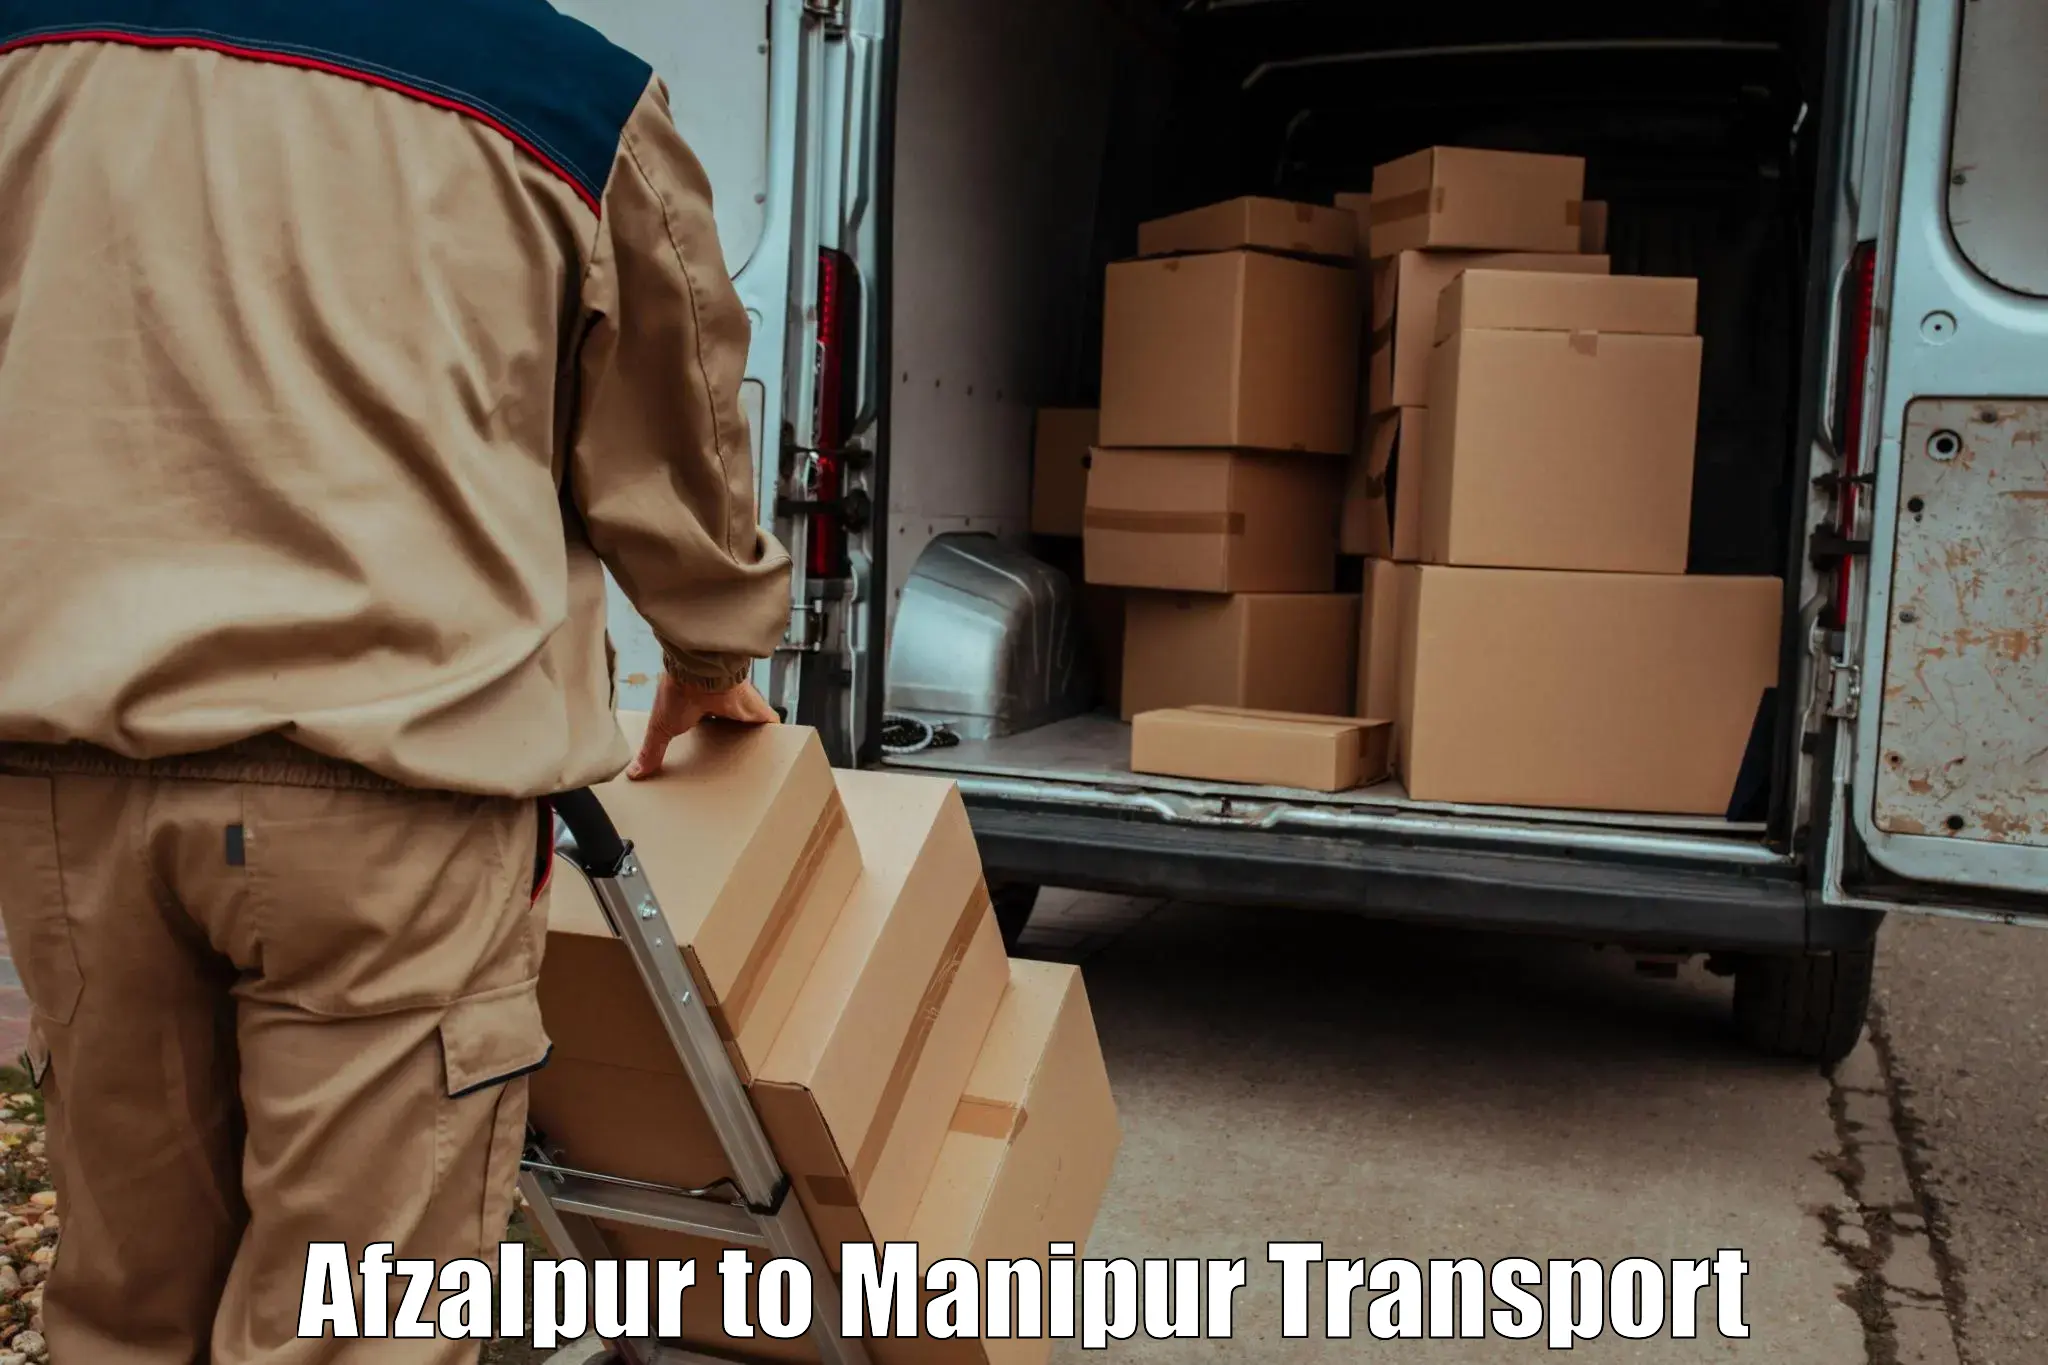 Container transport service Afzalpur to Manipur